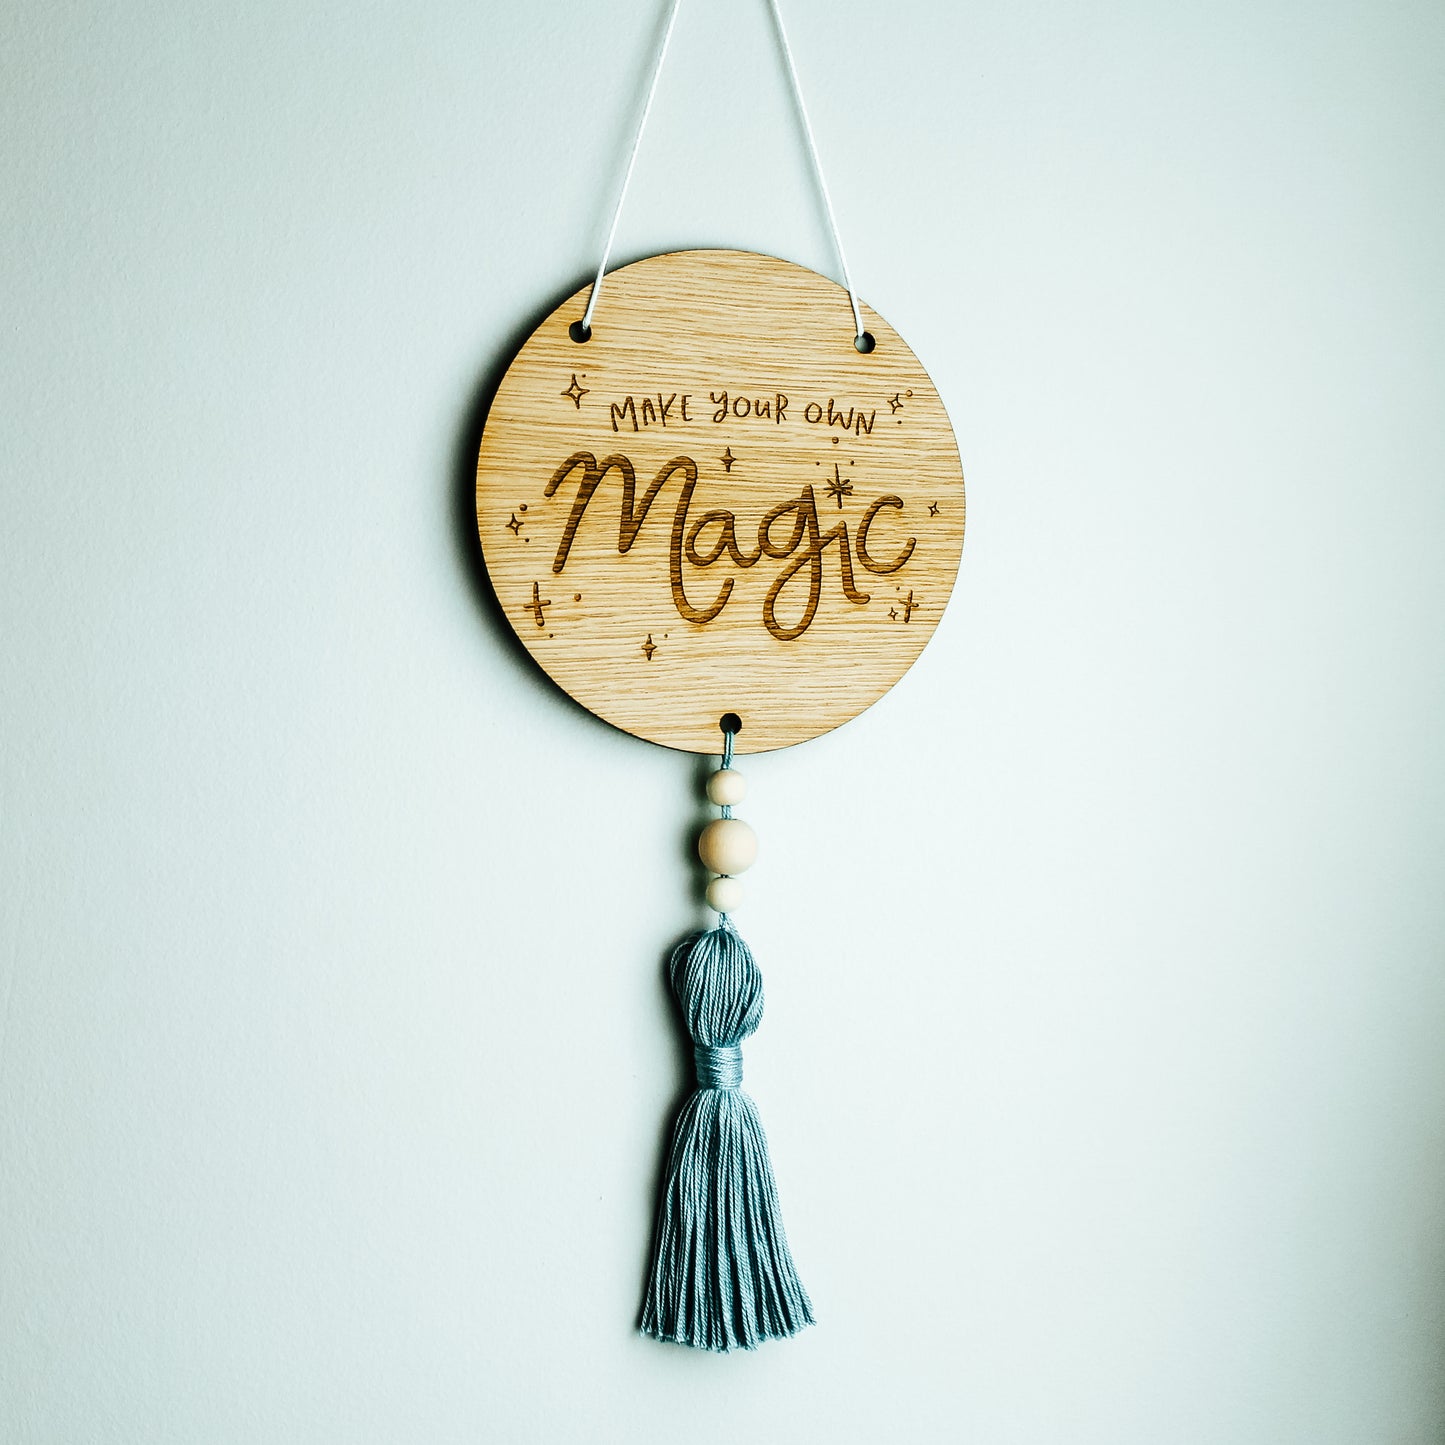 Make Magic - Inspirational Round Wooden Sign With Tassel